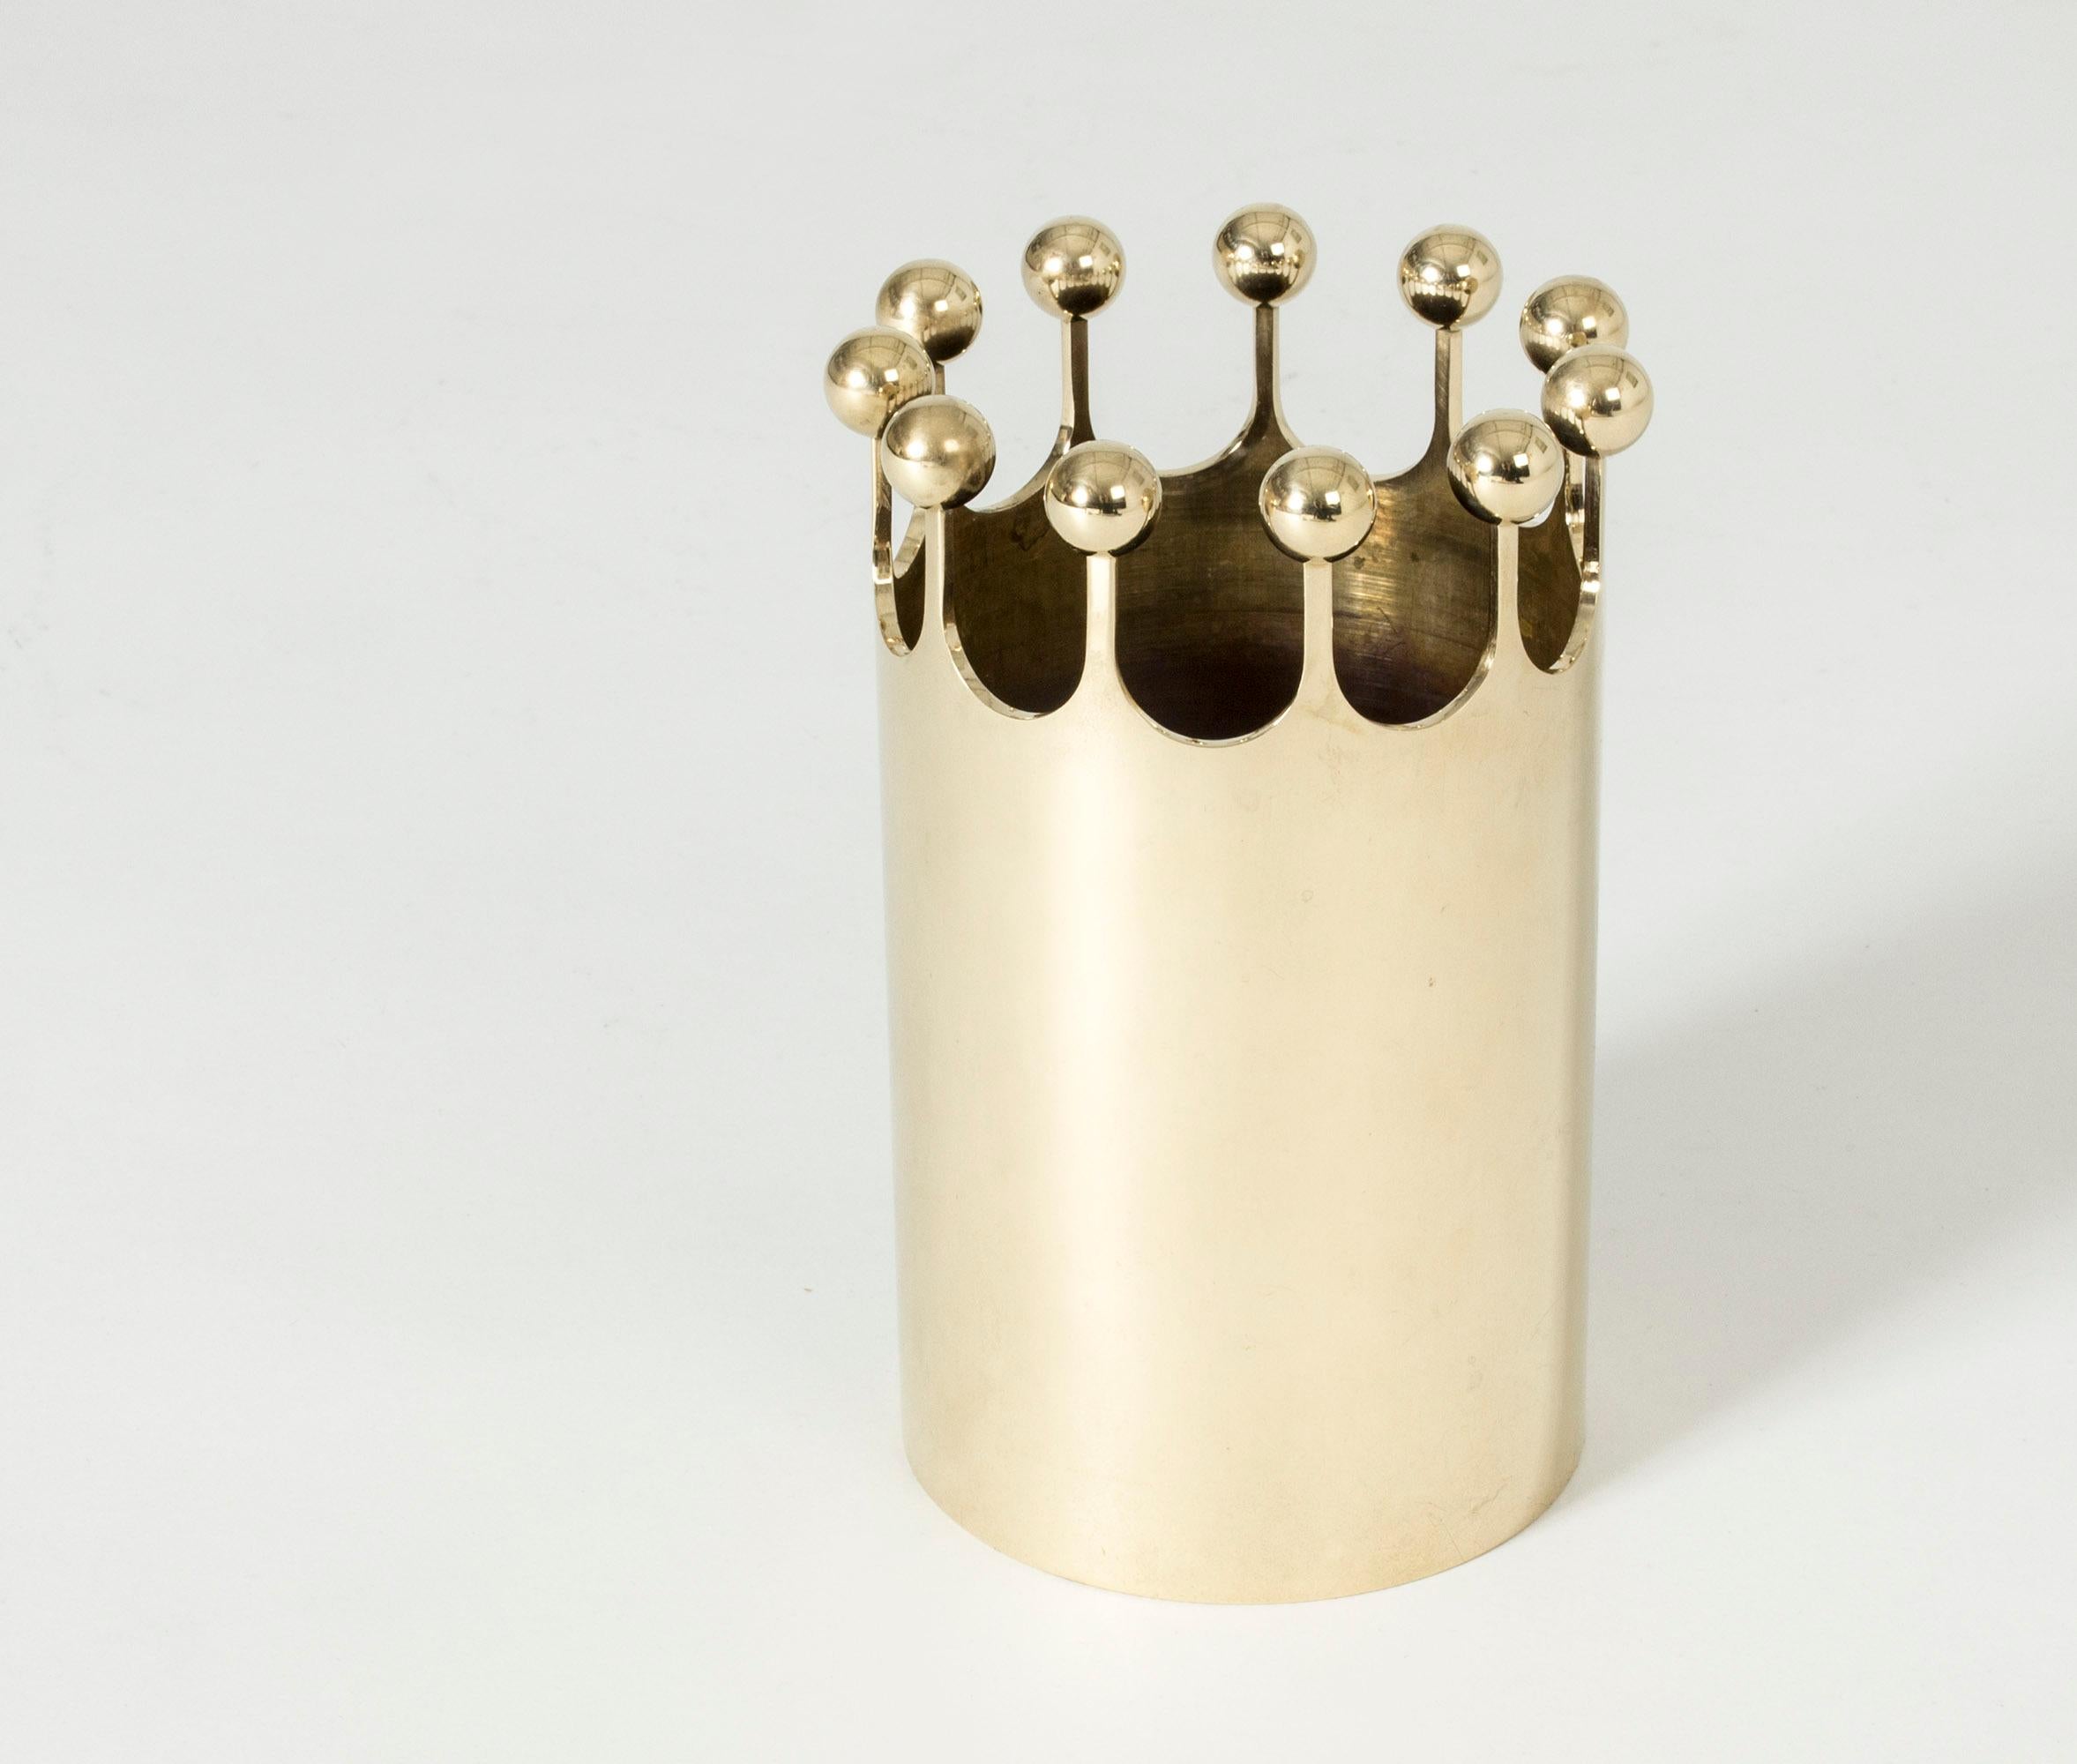 Beautiful brass vase in a crown shape by Pierre Forssell. Whimsical and luxurious at the same time.